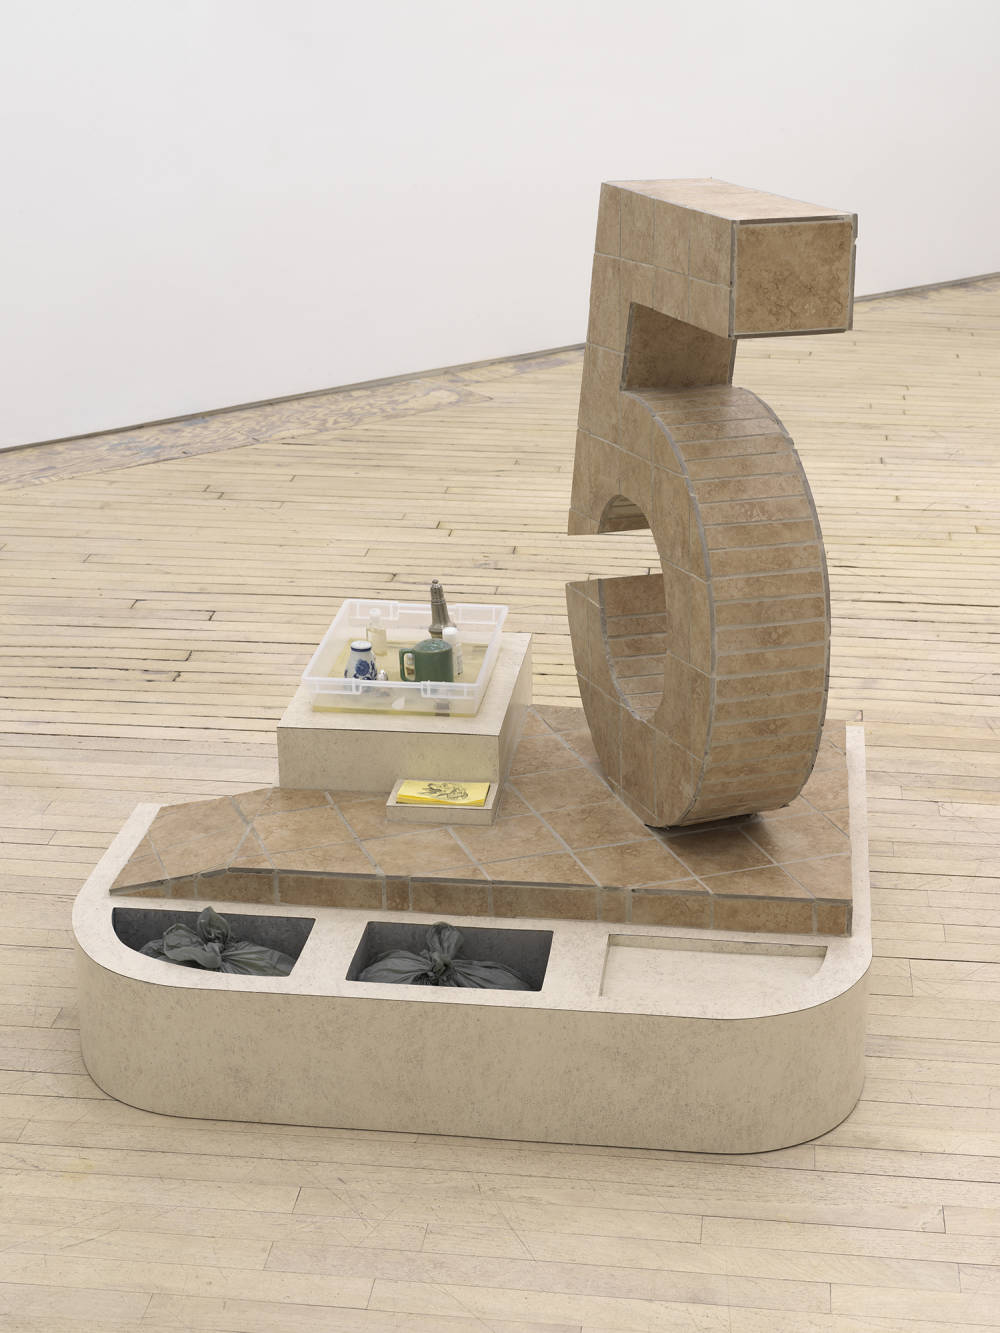 In a gallery space, a large abstract number 5 sculpture constructed out of flooring titles. The base of the sculpture contains two plastic bags and several salt and pepper shakers. There is a stack of post-it notes.